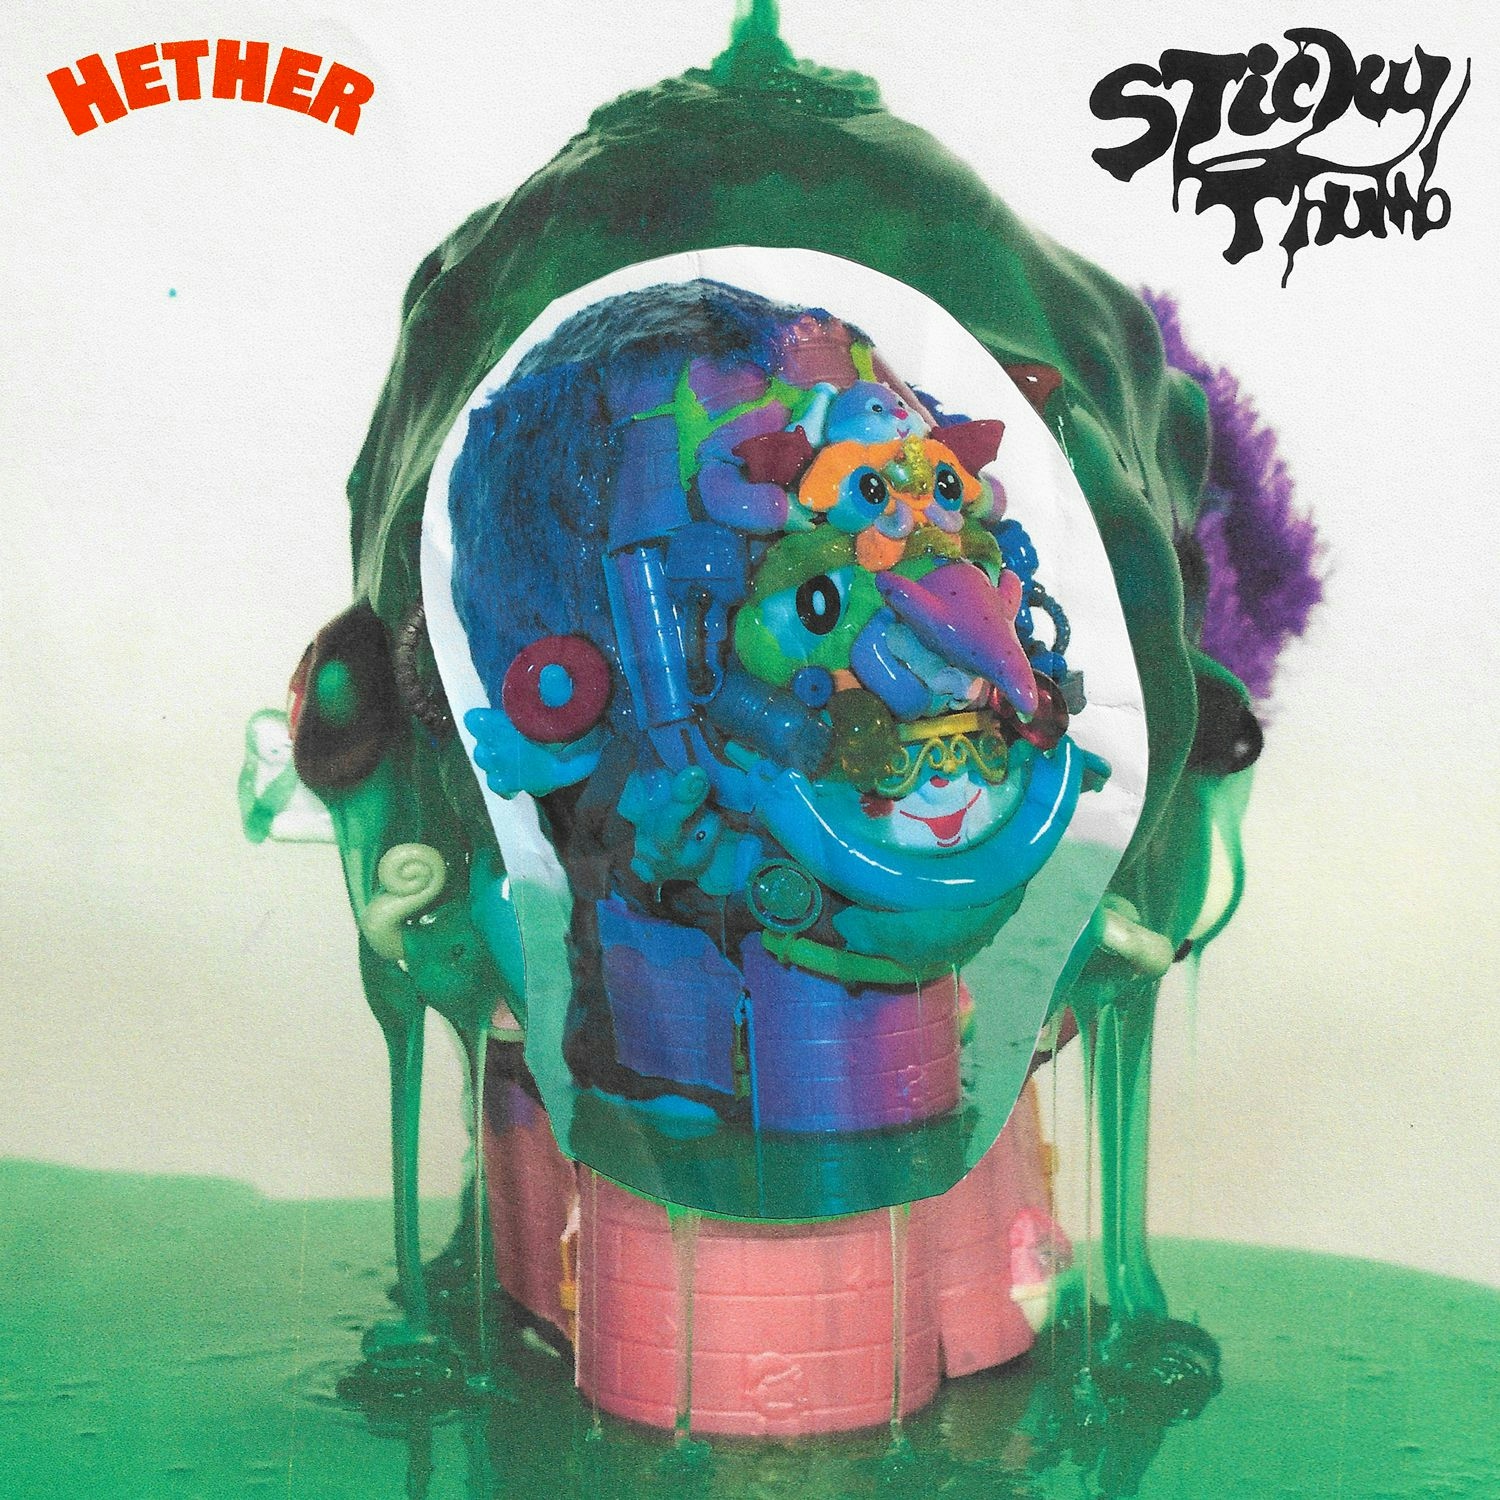 Hether Sticky Thumb cover art of a head dripping with green slime